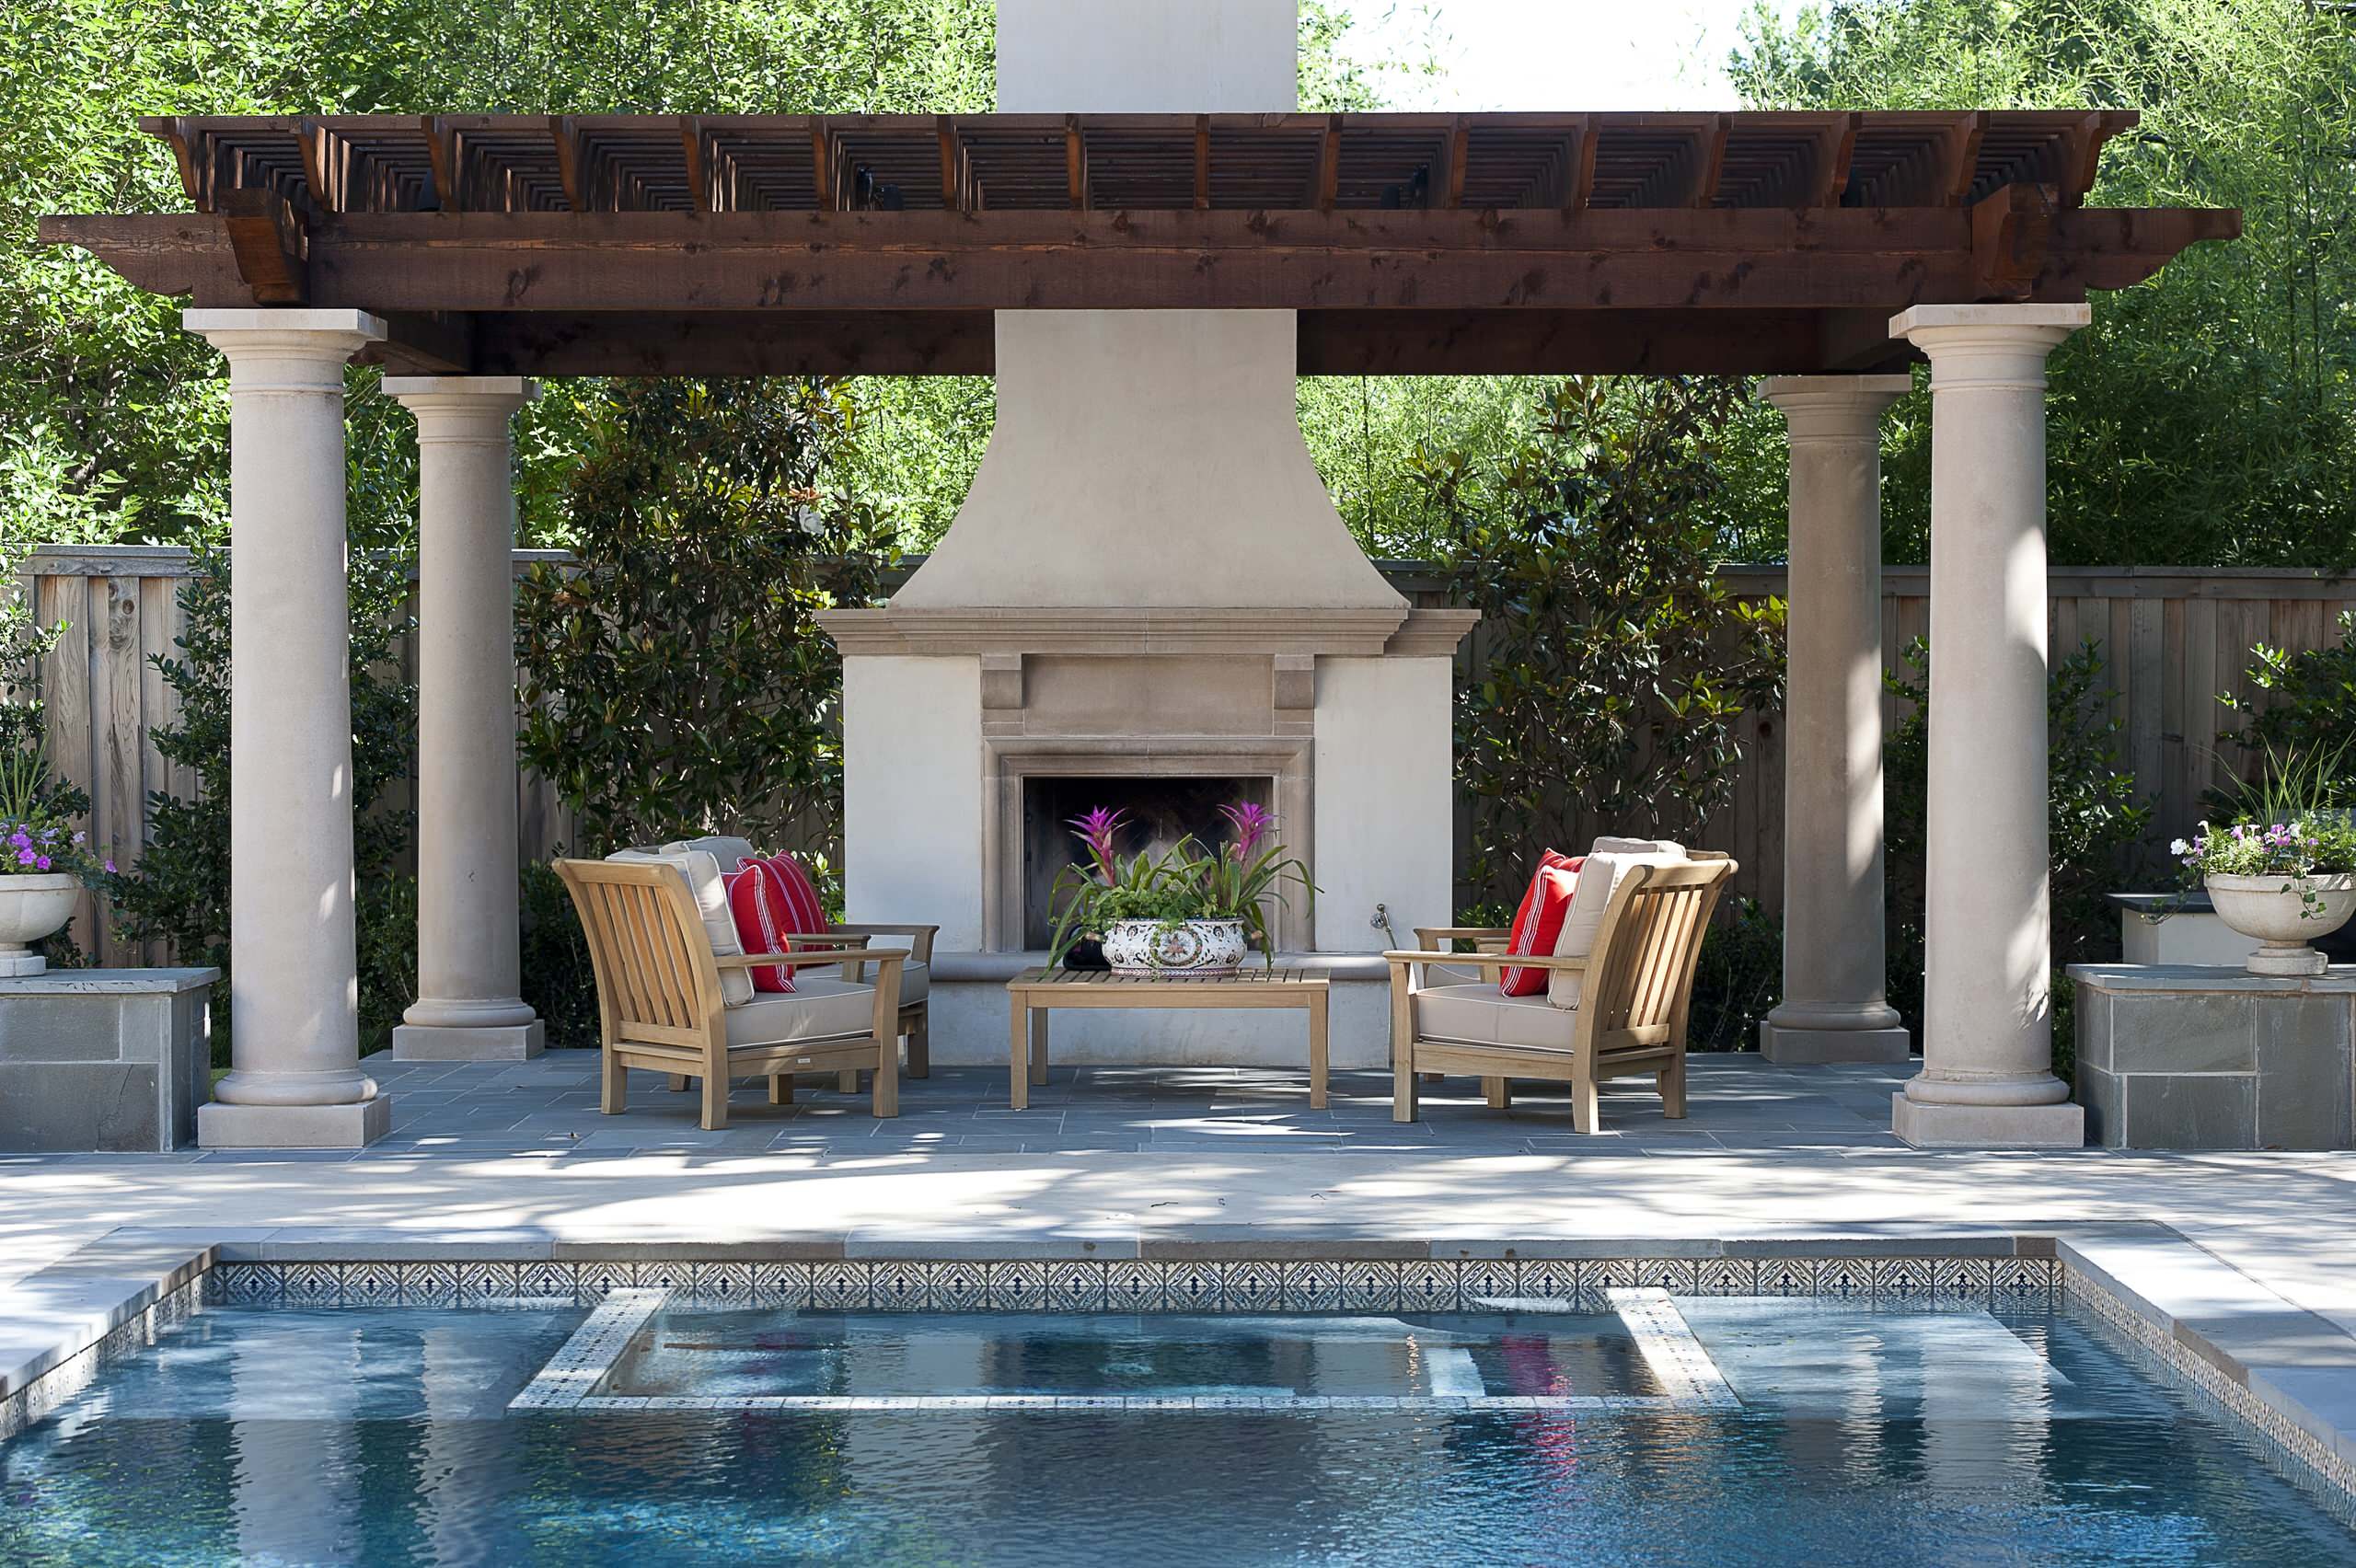 75 Beautiful Outdoor With A Fire Pit And A Gazebo Pictures Ideas December 2021 Houzz